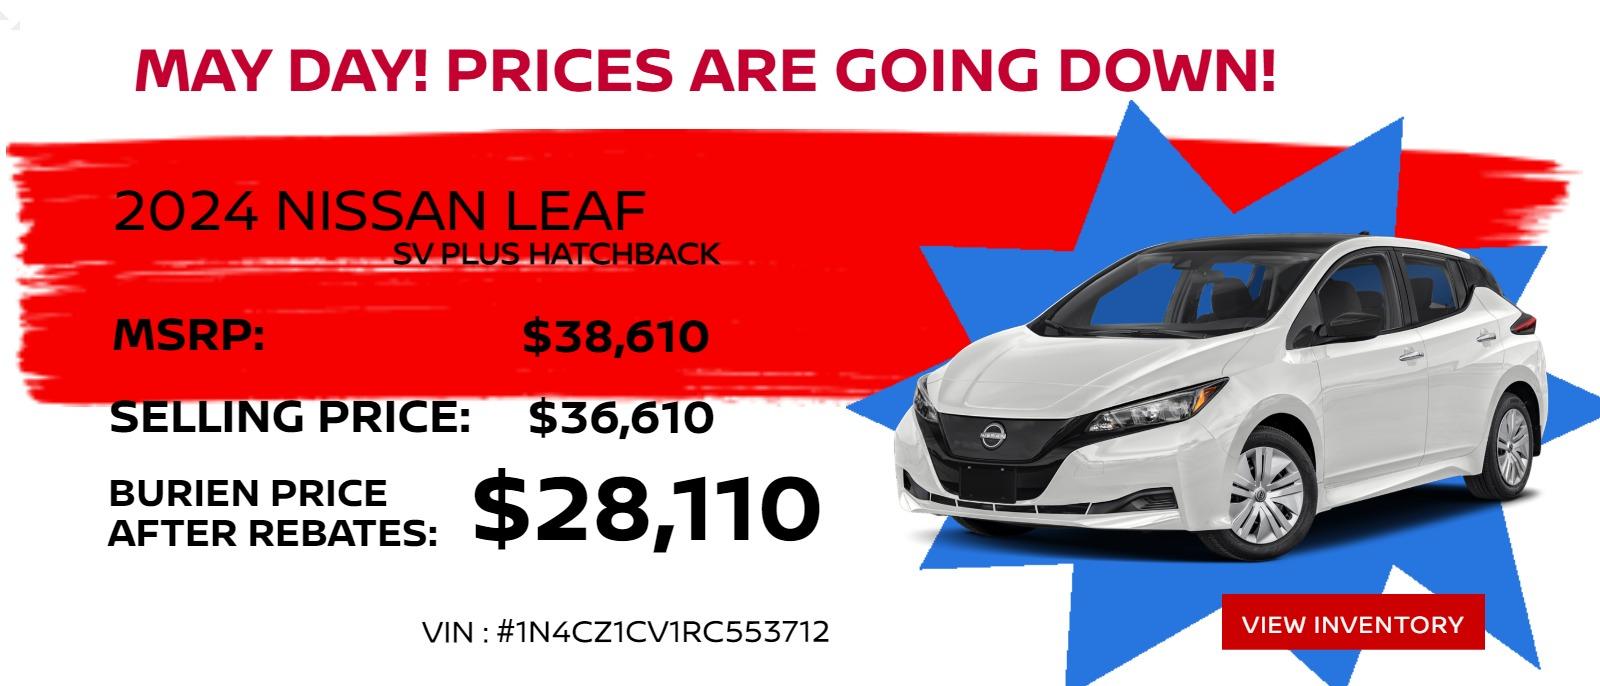 2024 Nissan LEAF
MSRP: $38610
SELLING PRICE: $36610
BELLEVUE PRICE AFTER REBATES: $28,110
MUST FINANCE WITH NISSAN MOTOR ACCEPTANCE CORPORATION AT SPECIAL RATES
STOCK # 24054
VIN: 1N4CZ1CV1RC553712